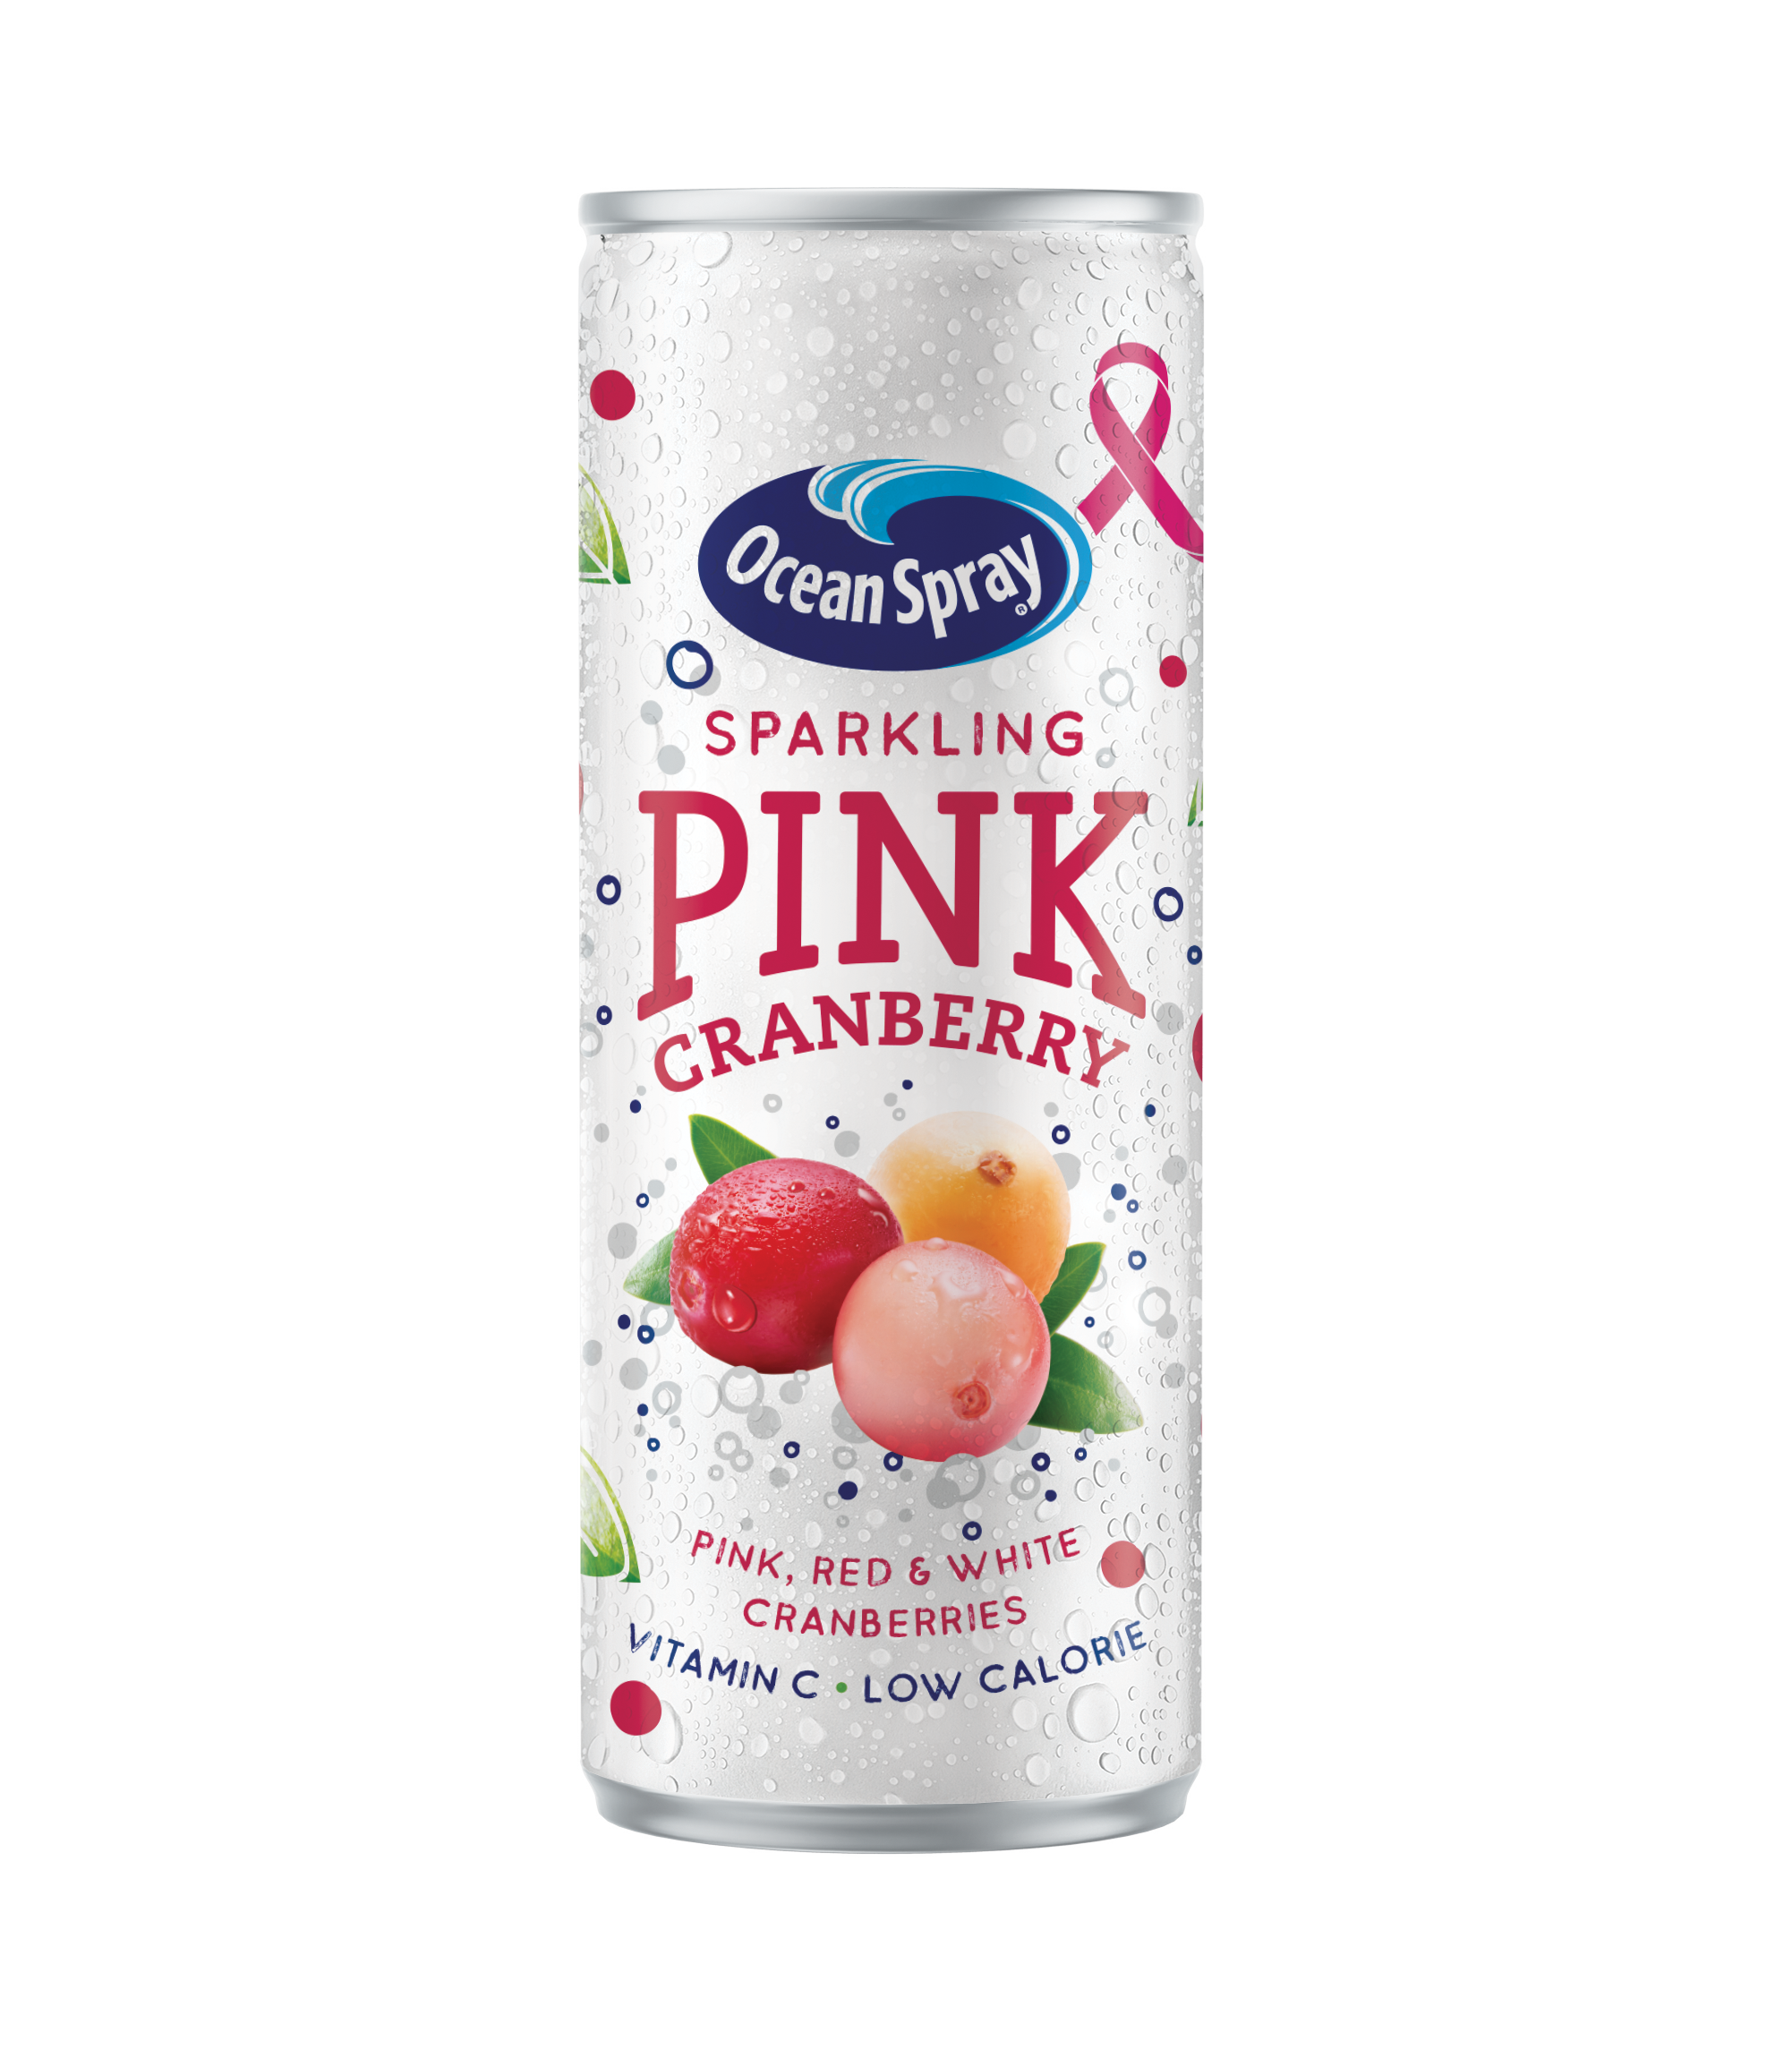 Ocean Spray relaunches new Sparkling Pink Cranberry in 25cl can